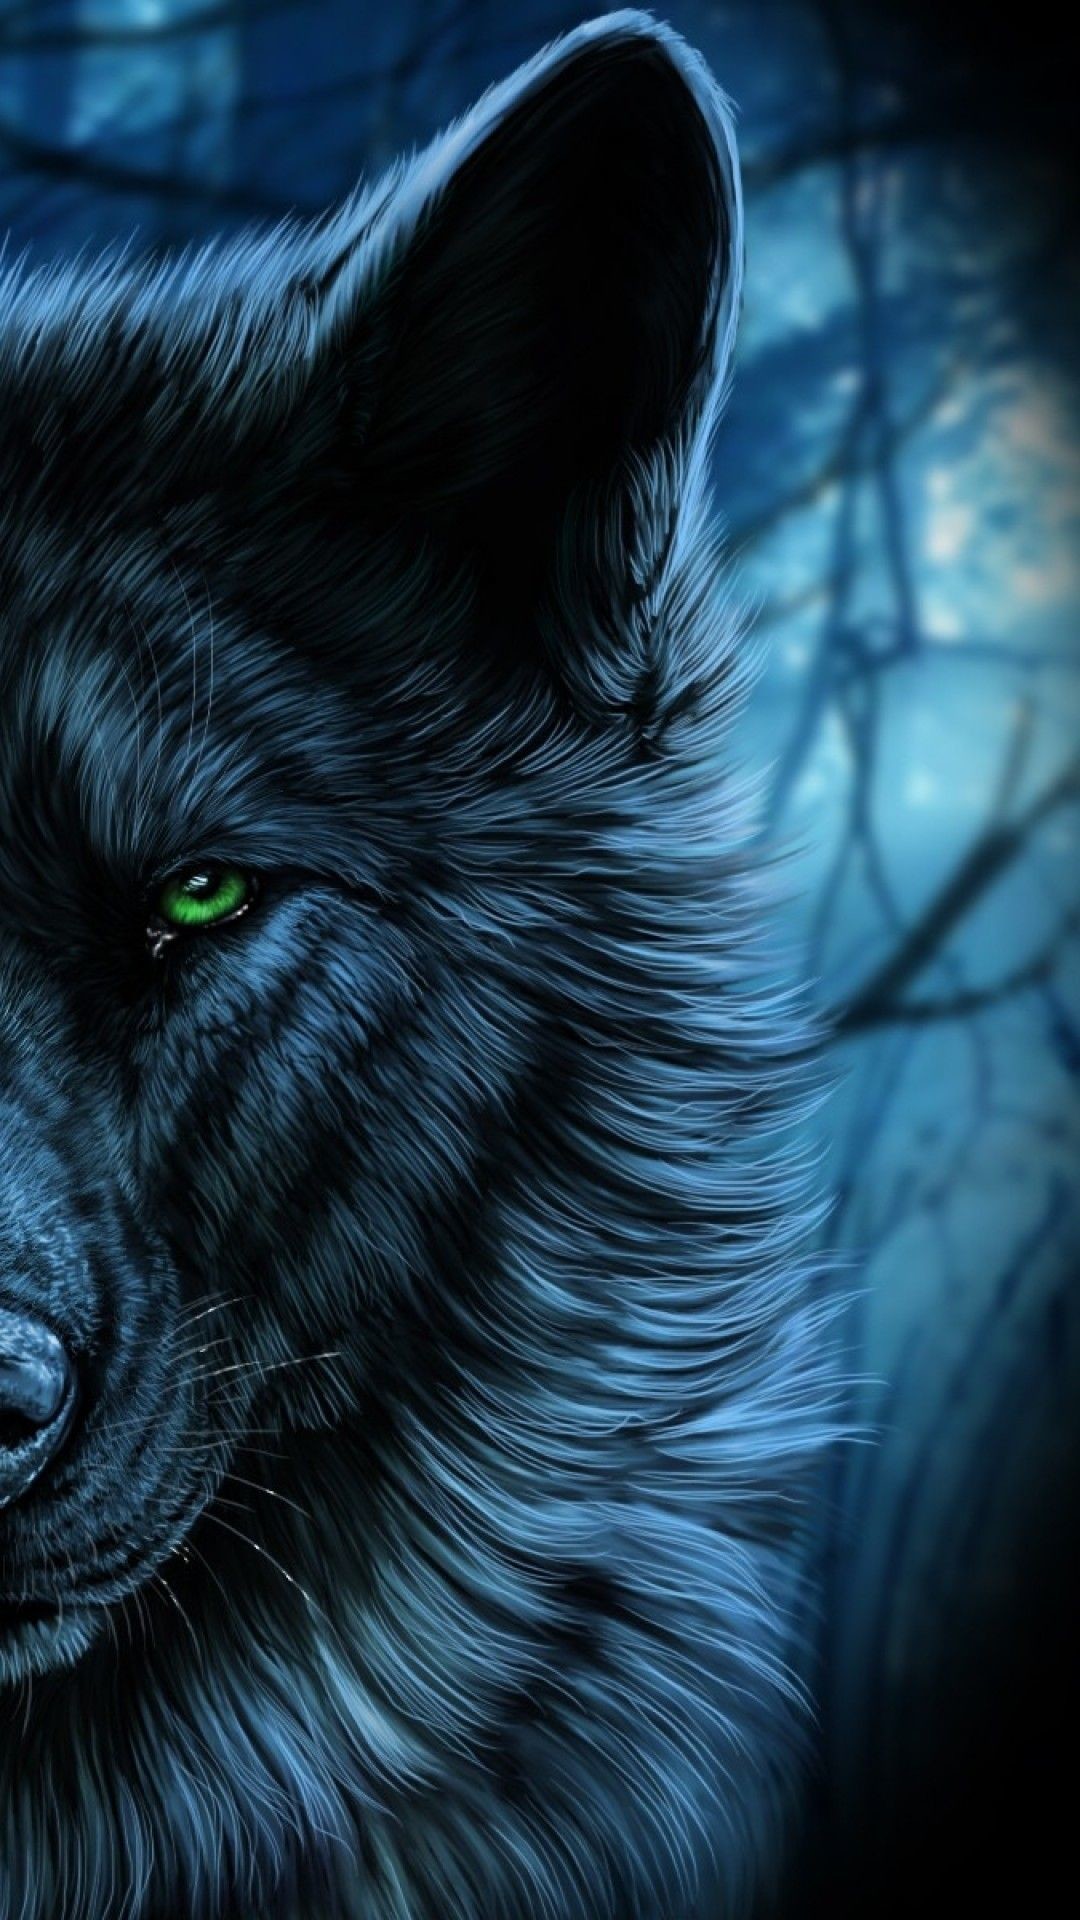 Wolf With Knives Wallpaper - Iphone 7 Wolf Wallpaper Hd - HD Wallpaper 